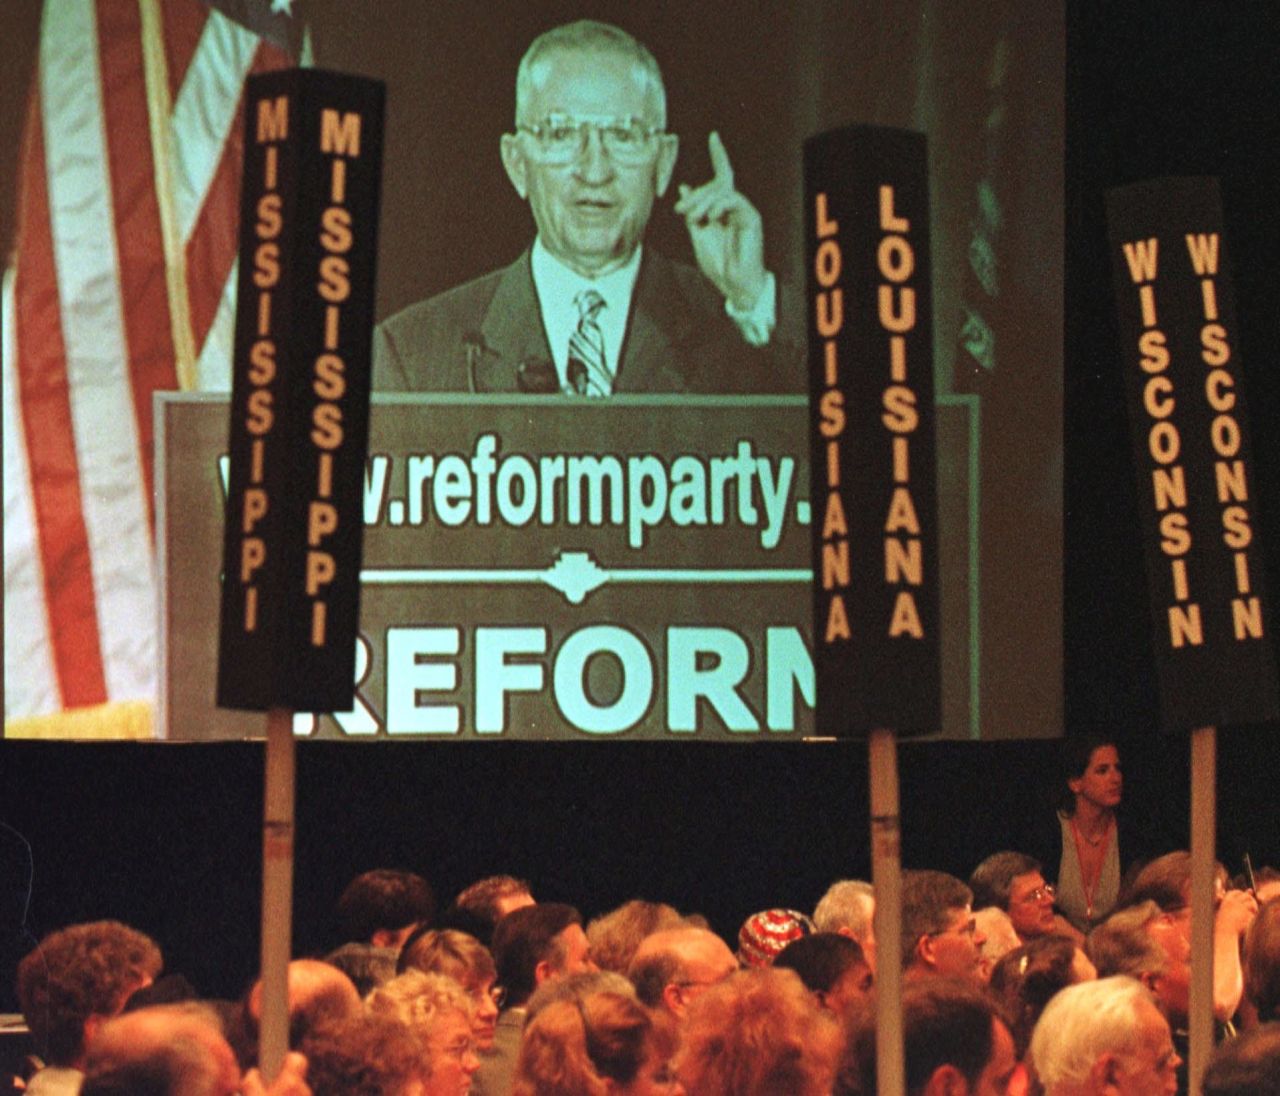 Ross Perot started off as a data processing salesman for IBM in the late 1950s in Texas before founding the Electronic Data Systems Corp., which would eventually make him a billionaire. In 1992, Perot made an independent run for president.